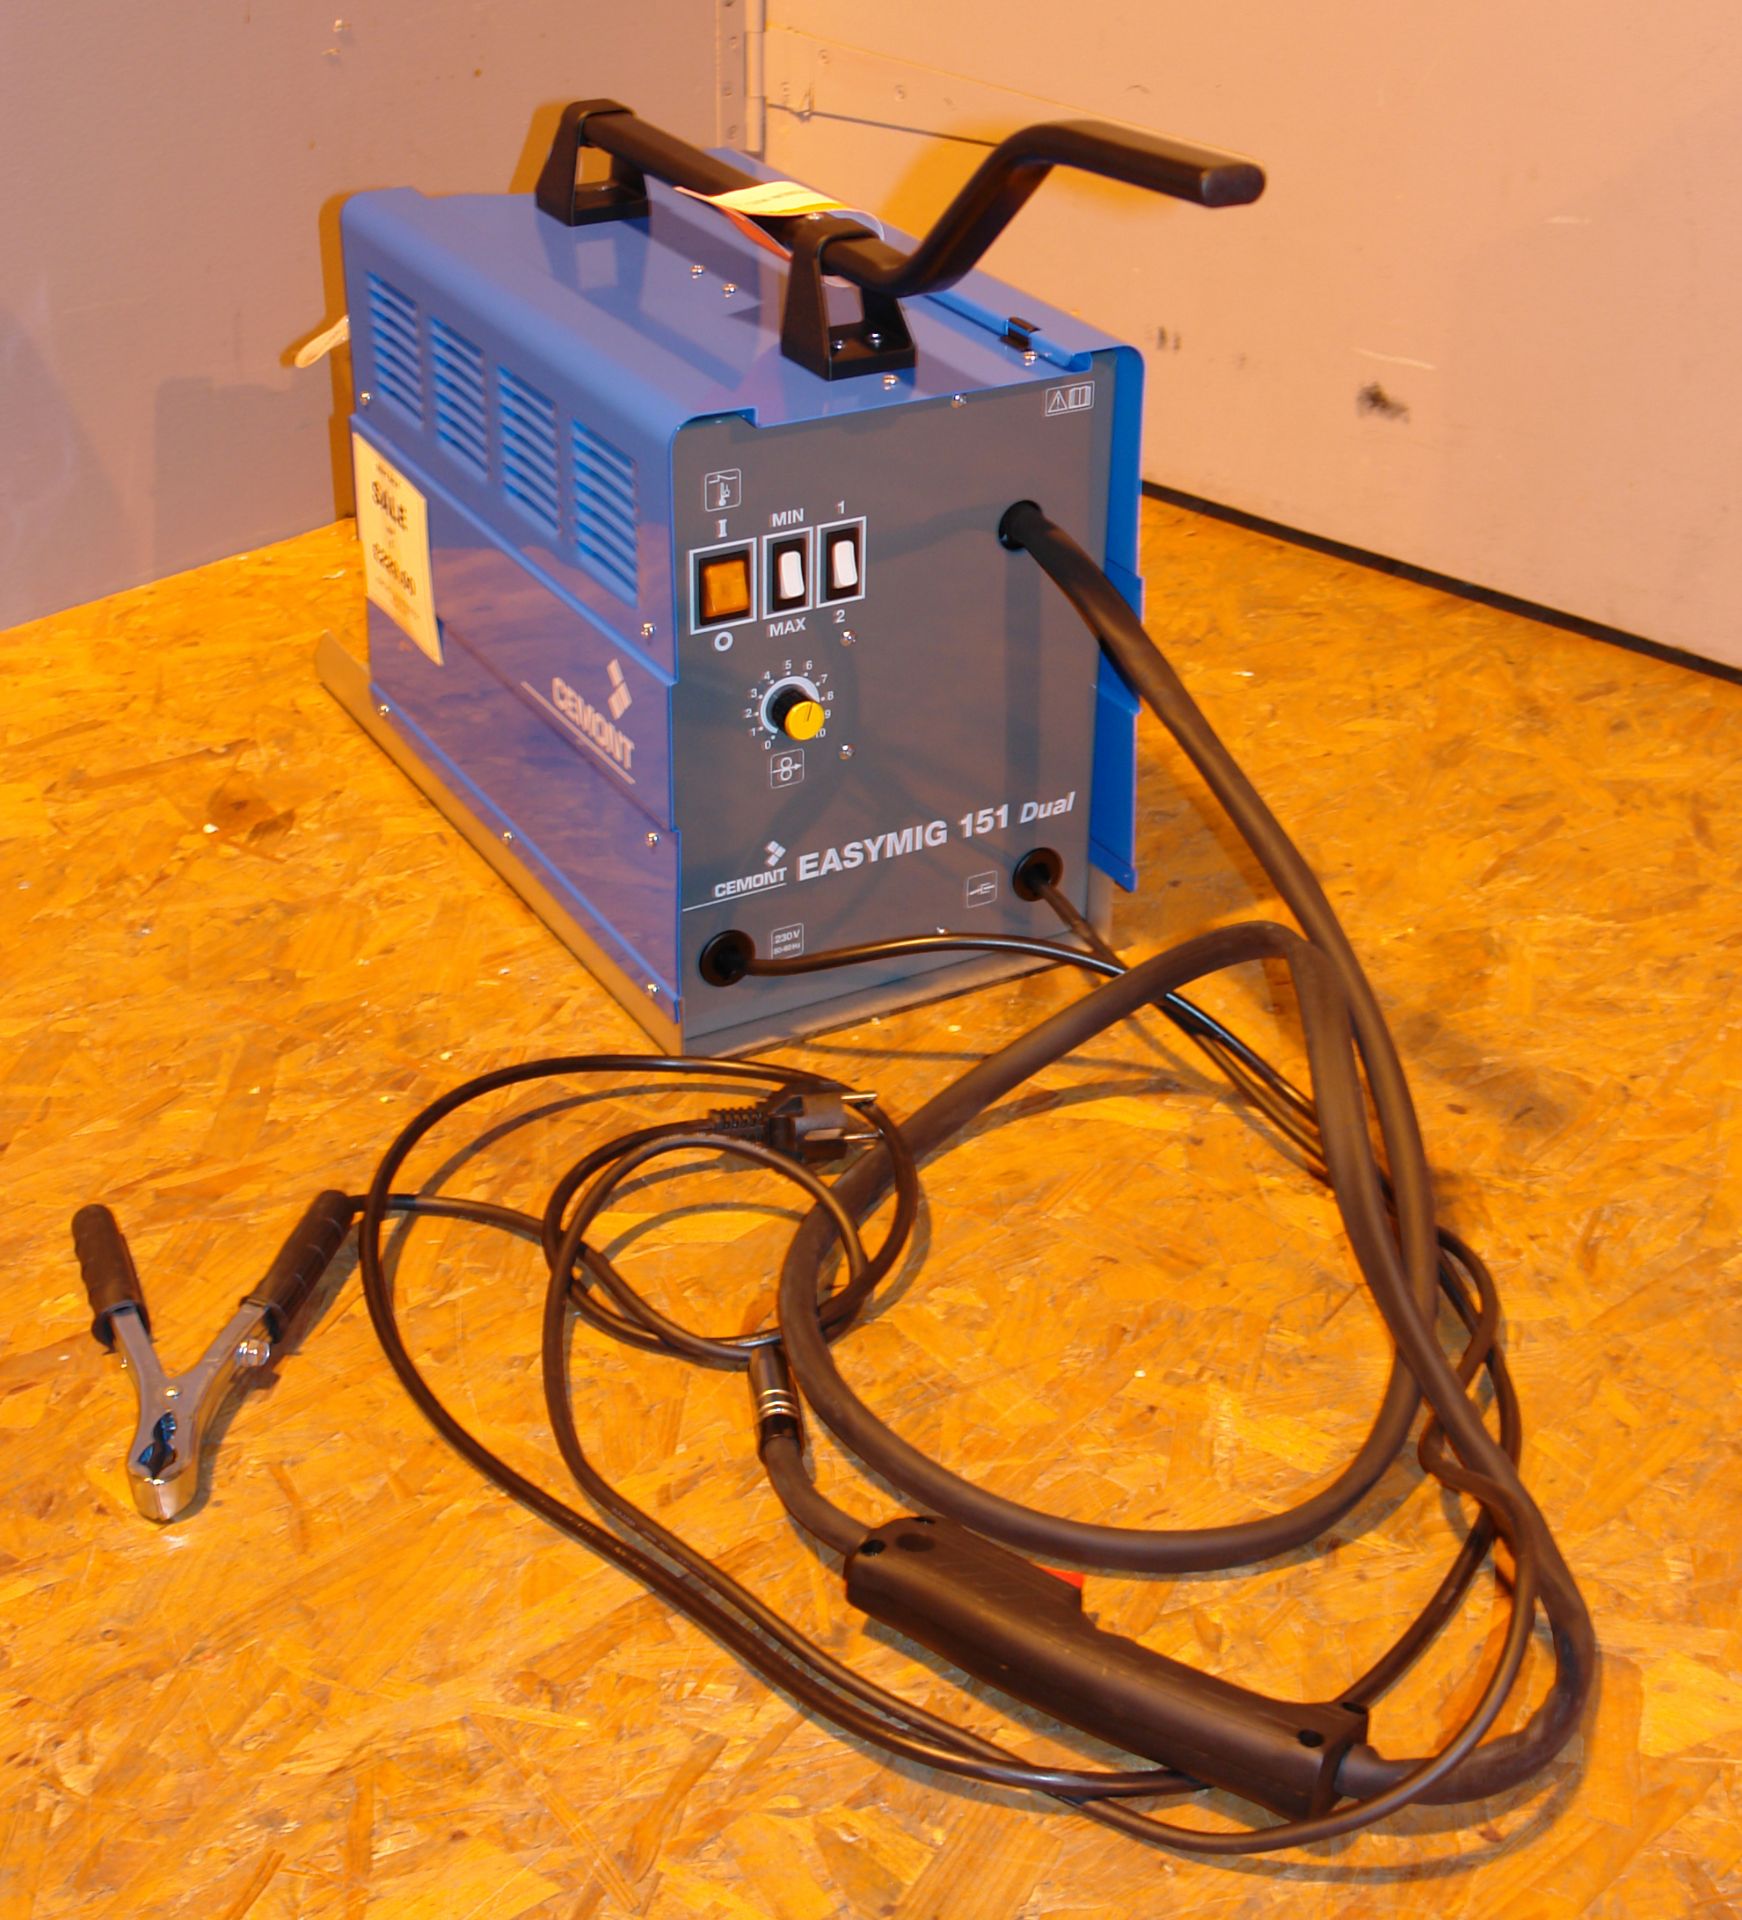 Cemont Easy Mig 151 Dual Gas/Gasless Mig Welder, serial no. 2114669383, with wheel kit, reel of